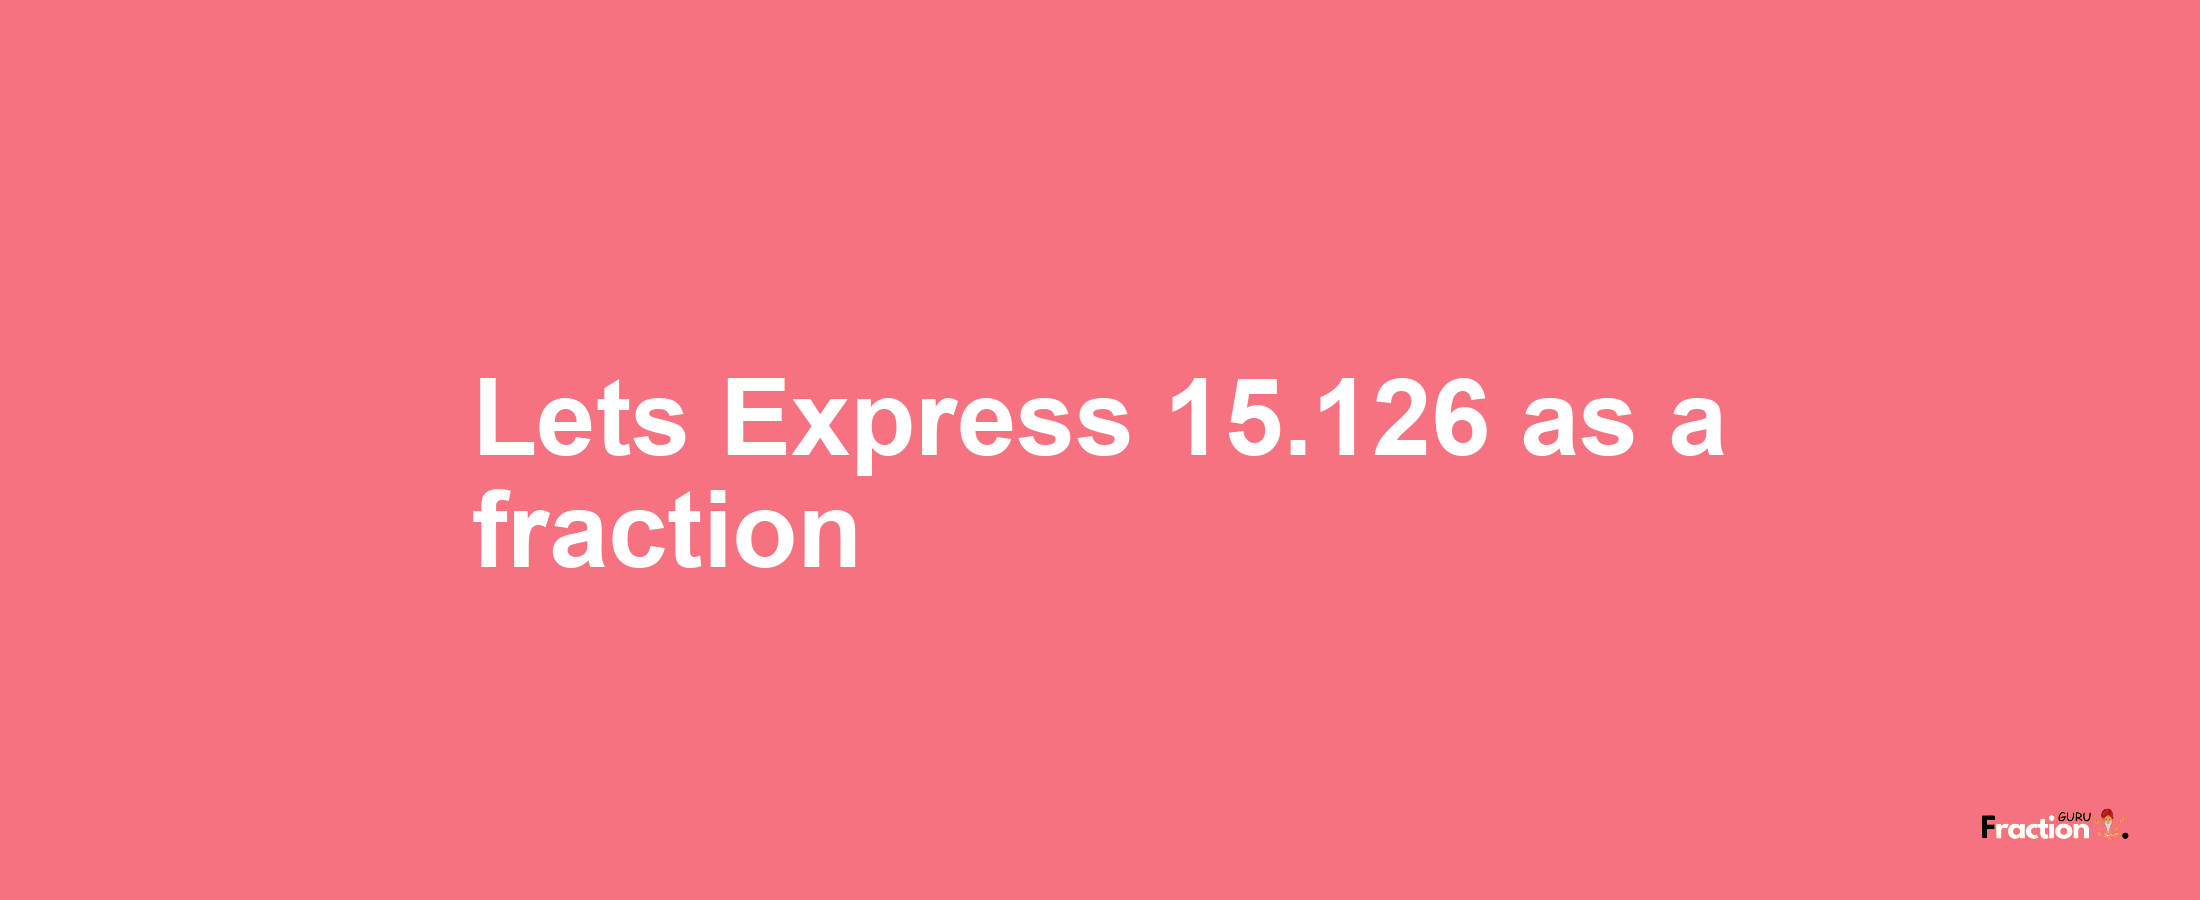 Lets Express 15.126 as afraction